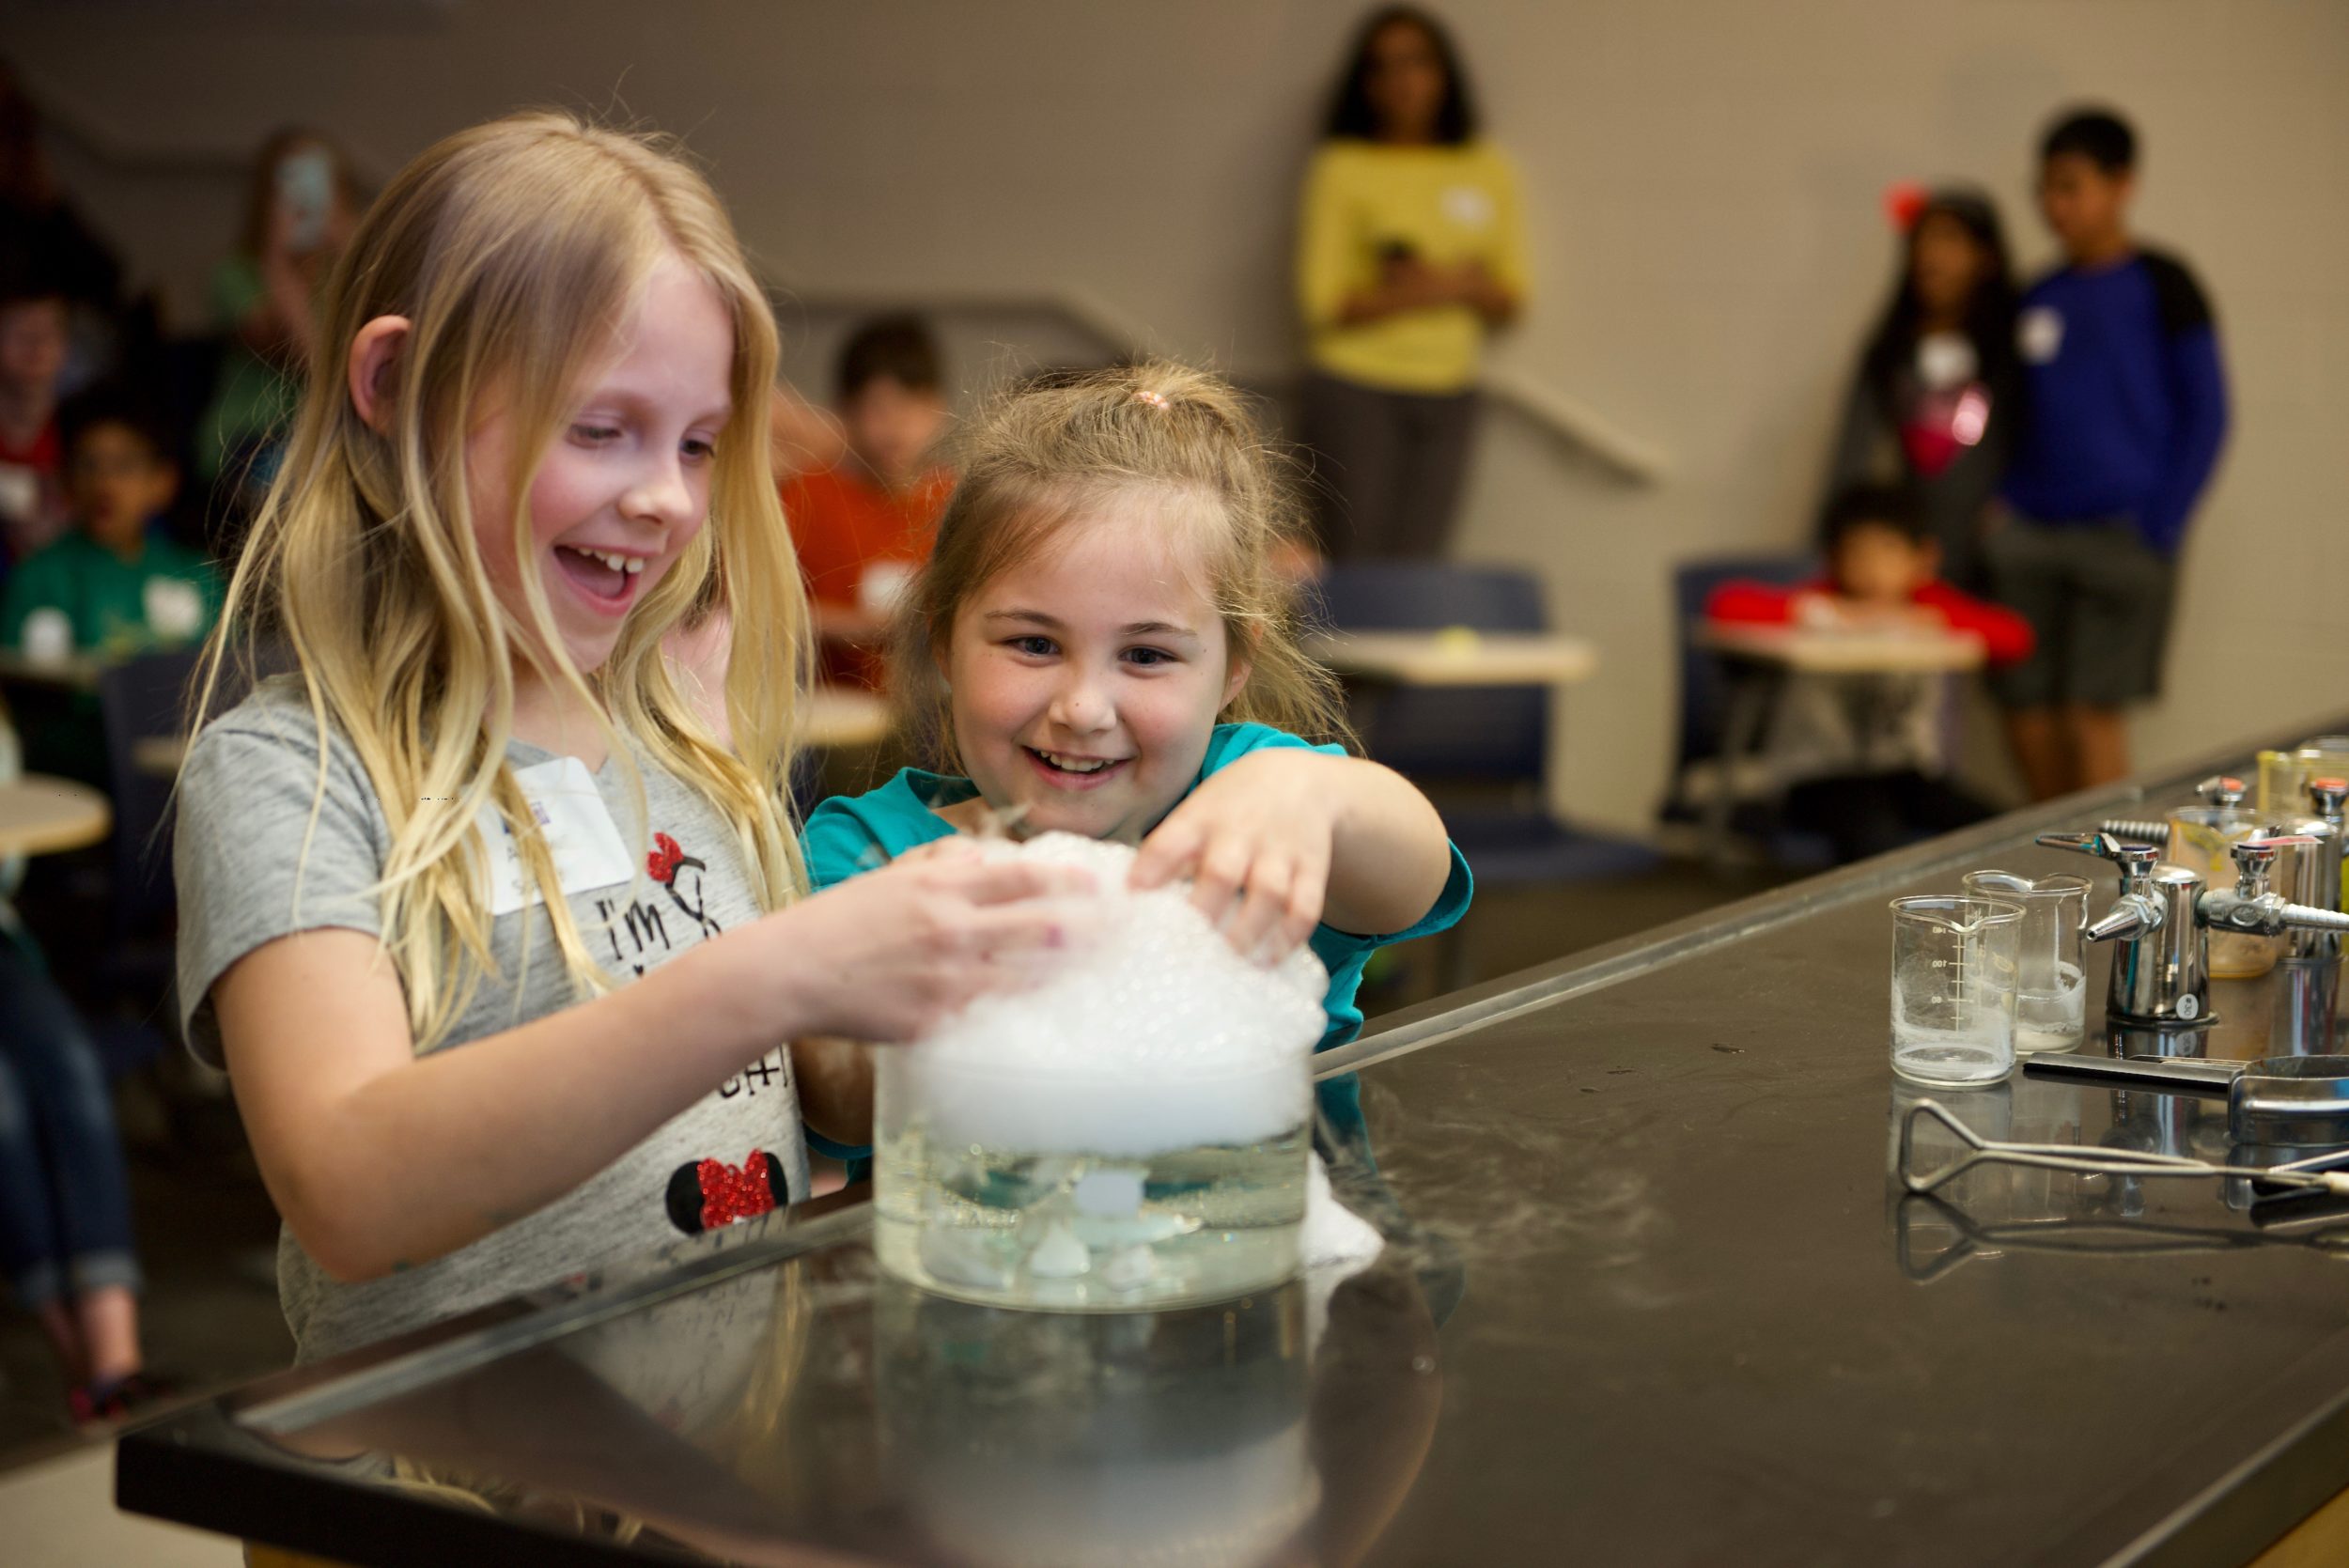 Children doing science experiments with bubbles